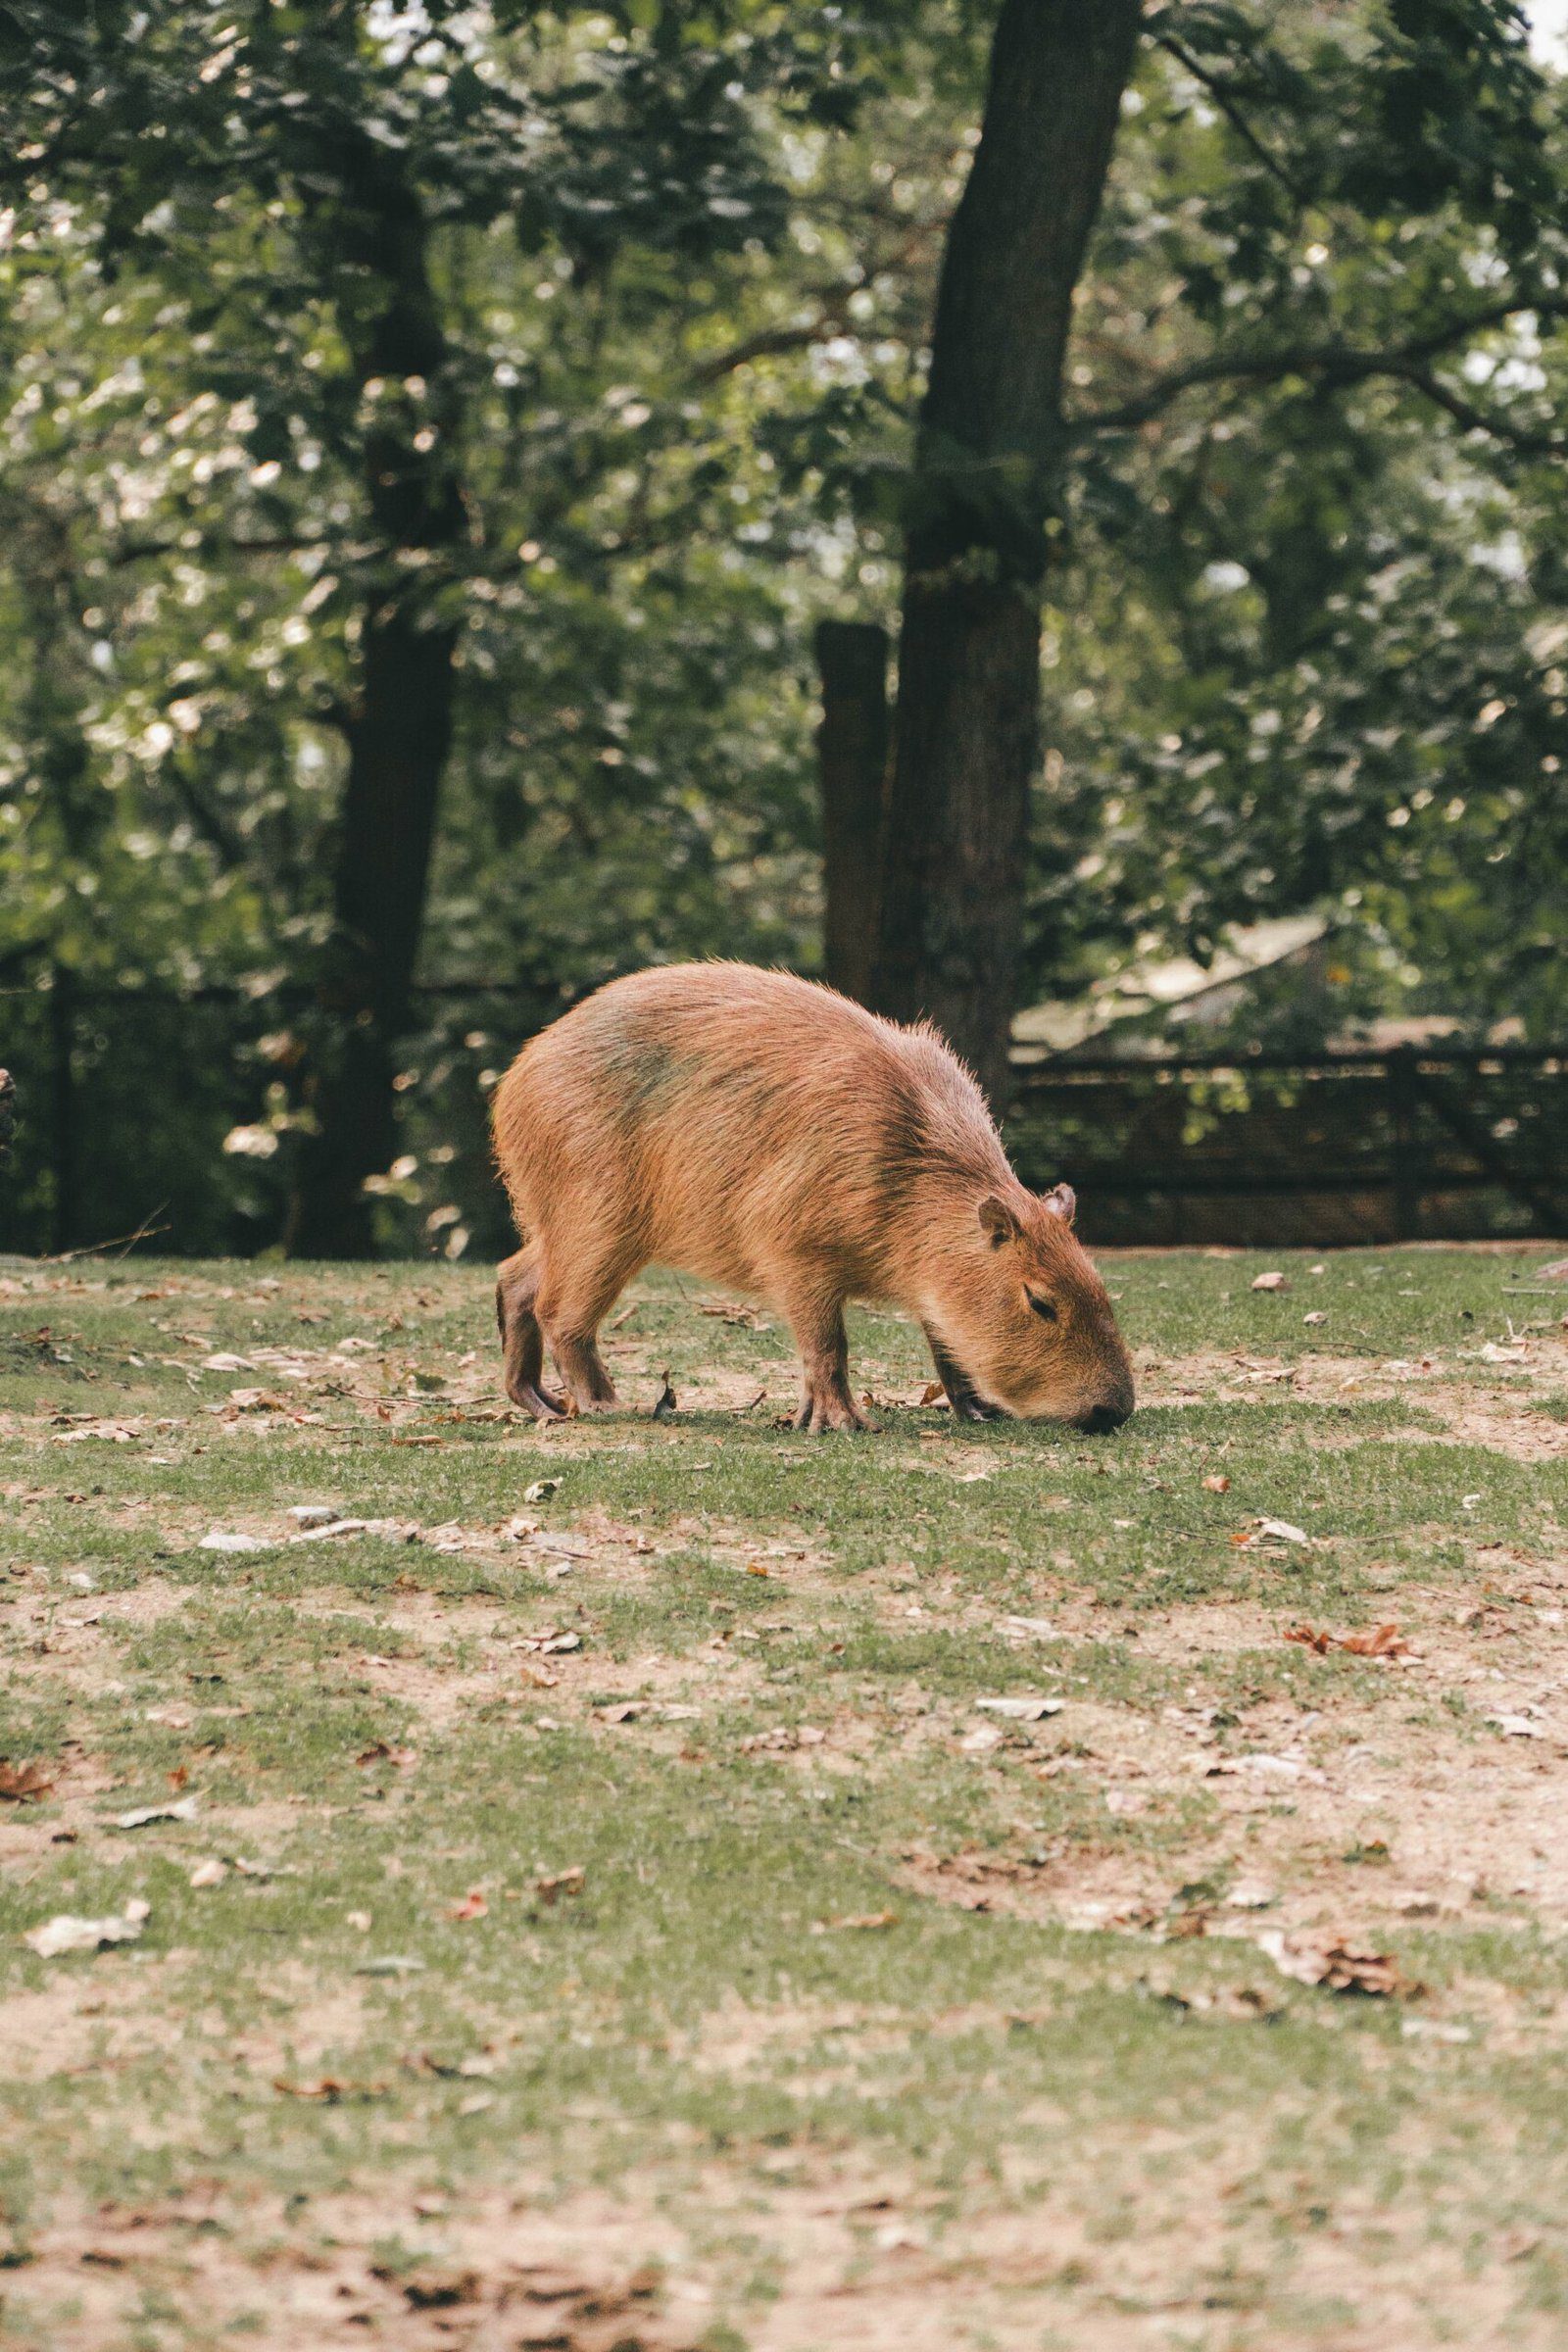 The Capybara: A Symbol of Cute and Cuddly